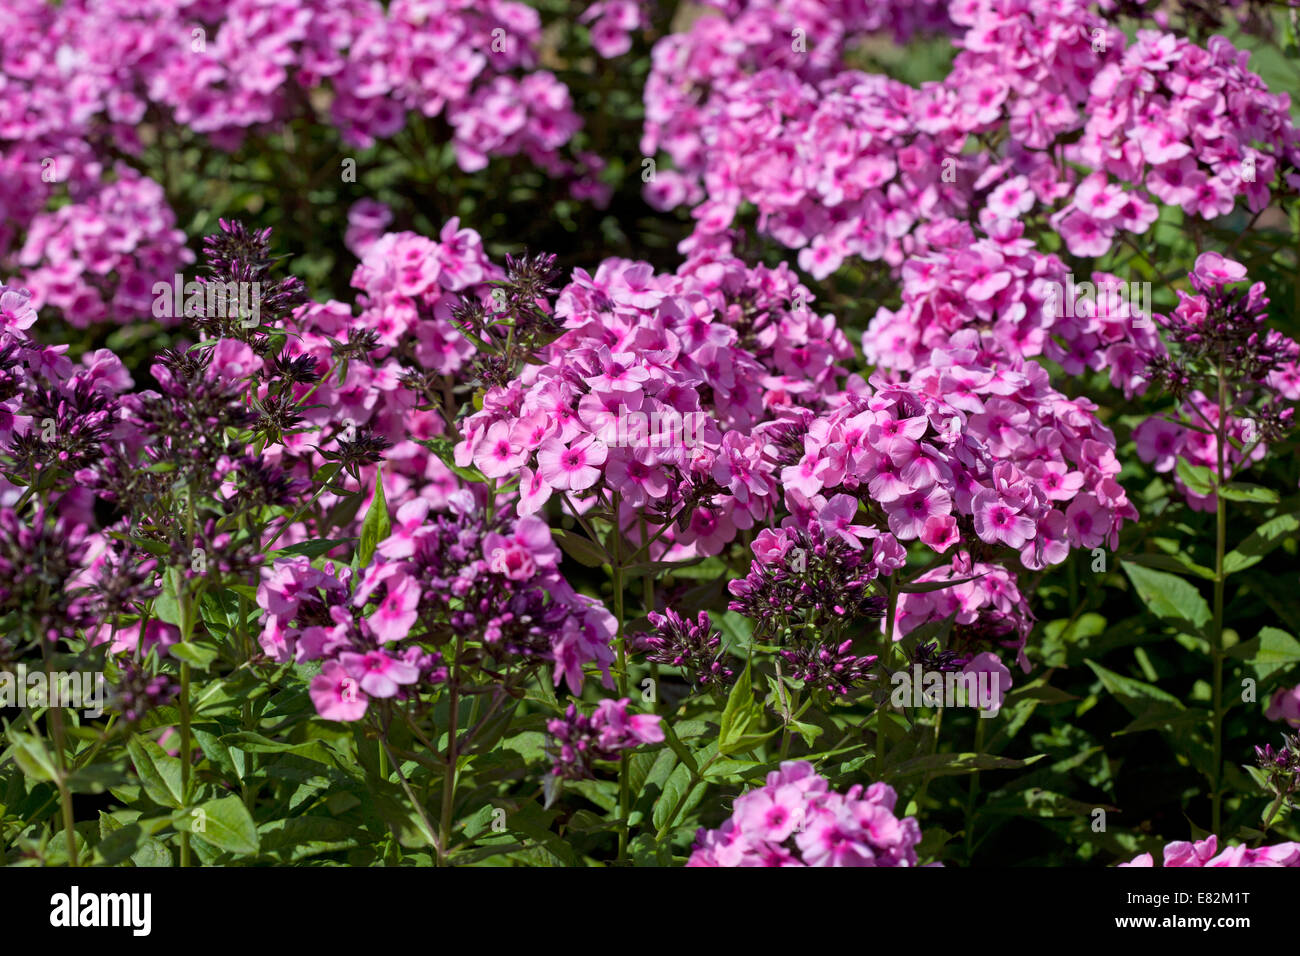 Phlox x arendsii 'Baby Face' Stock Photo